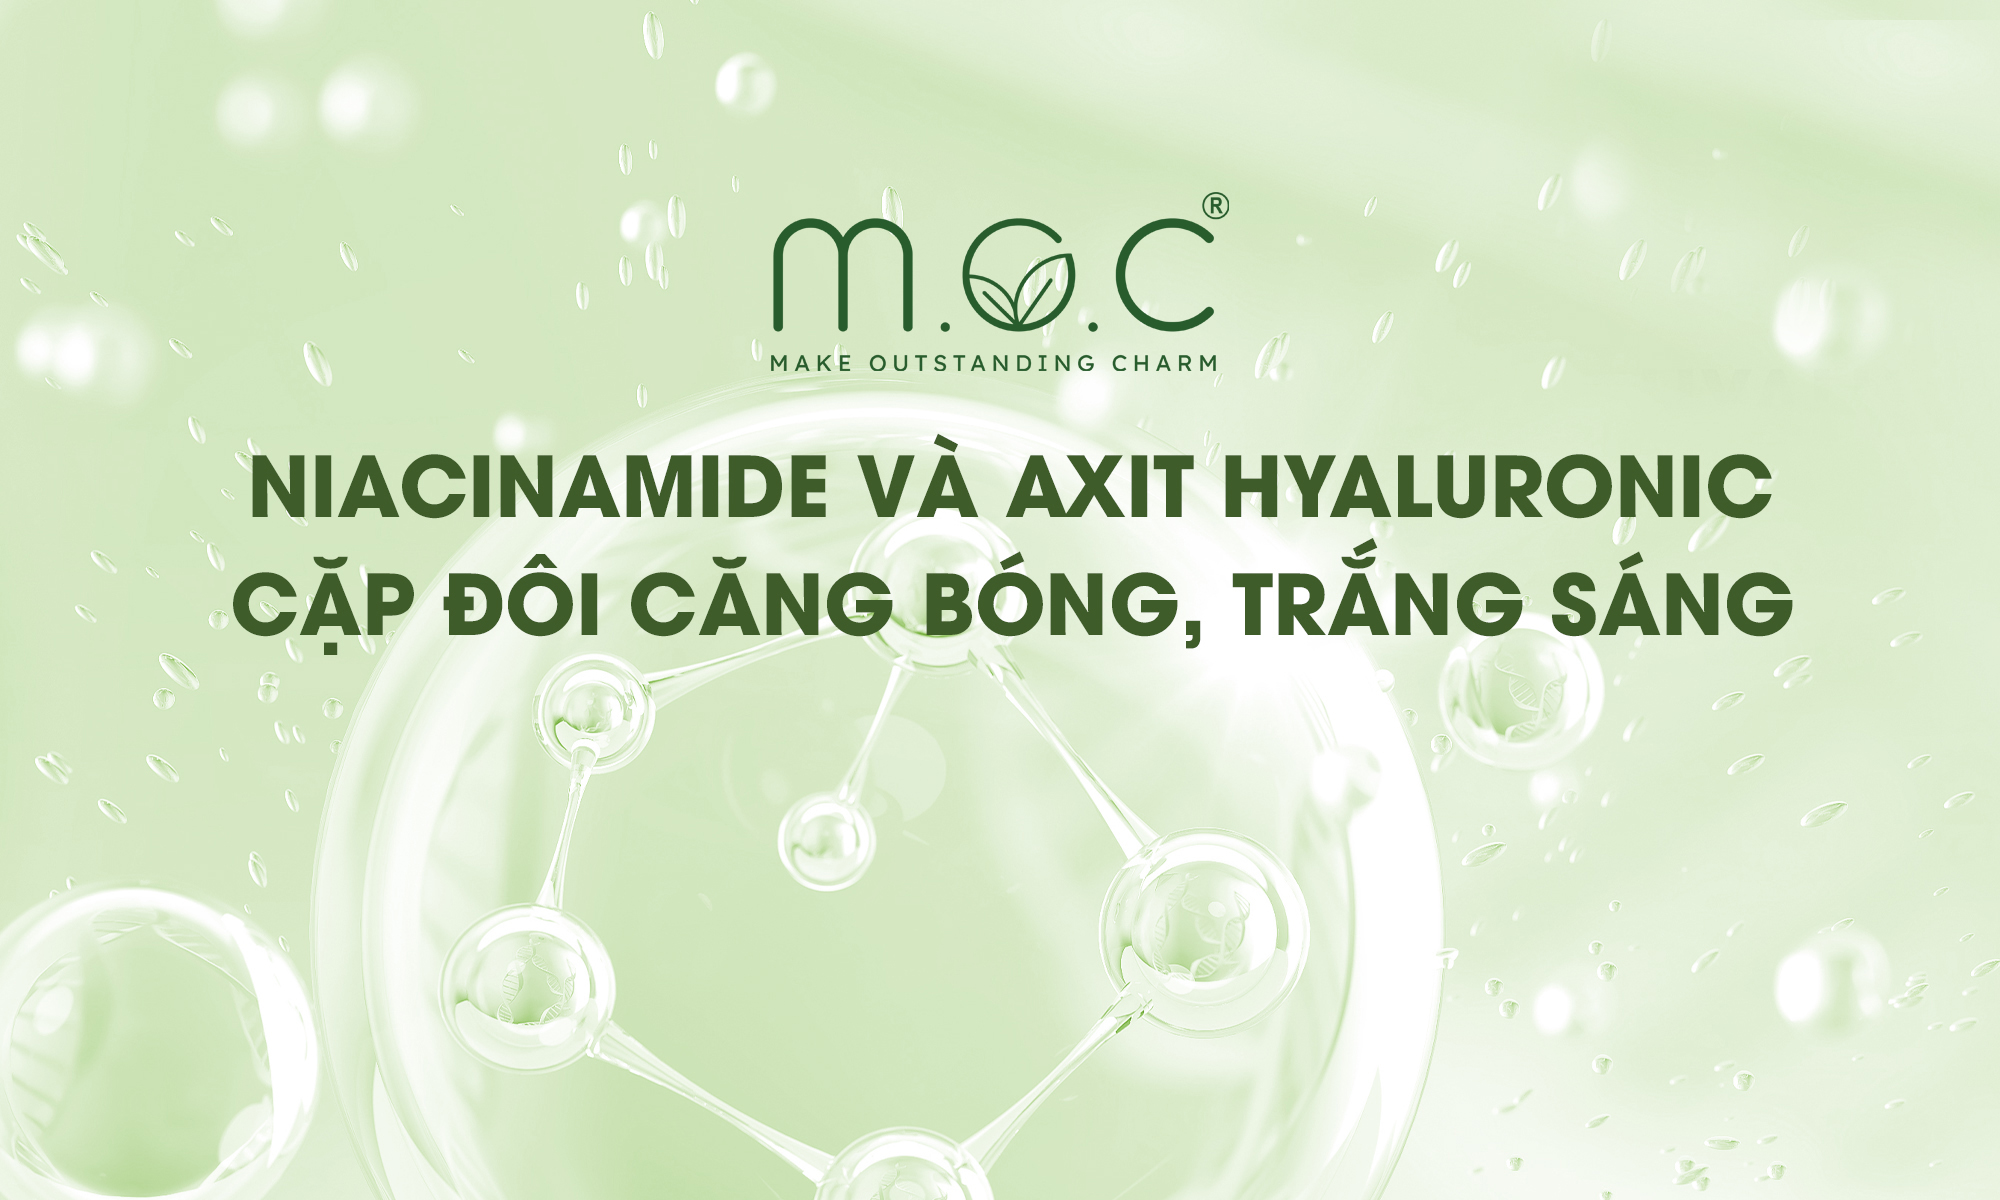 cong-dung-niacinamide-axit-hyaluronic